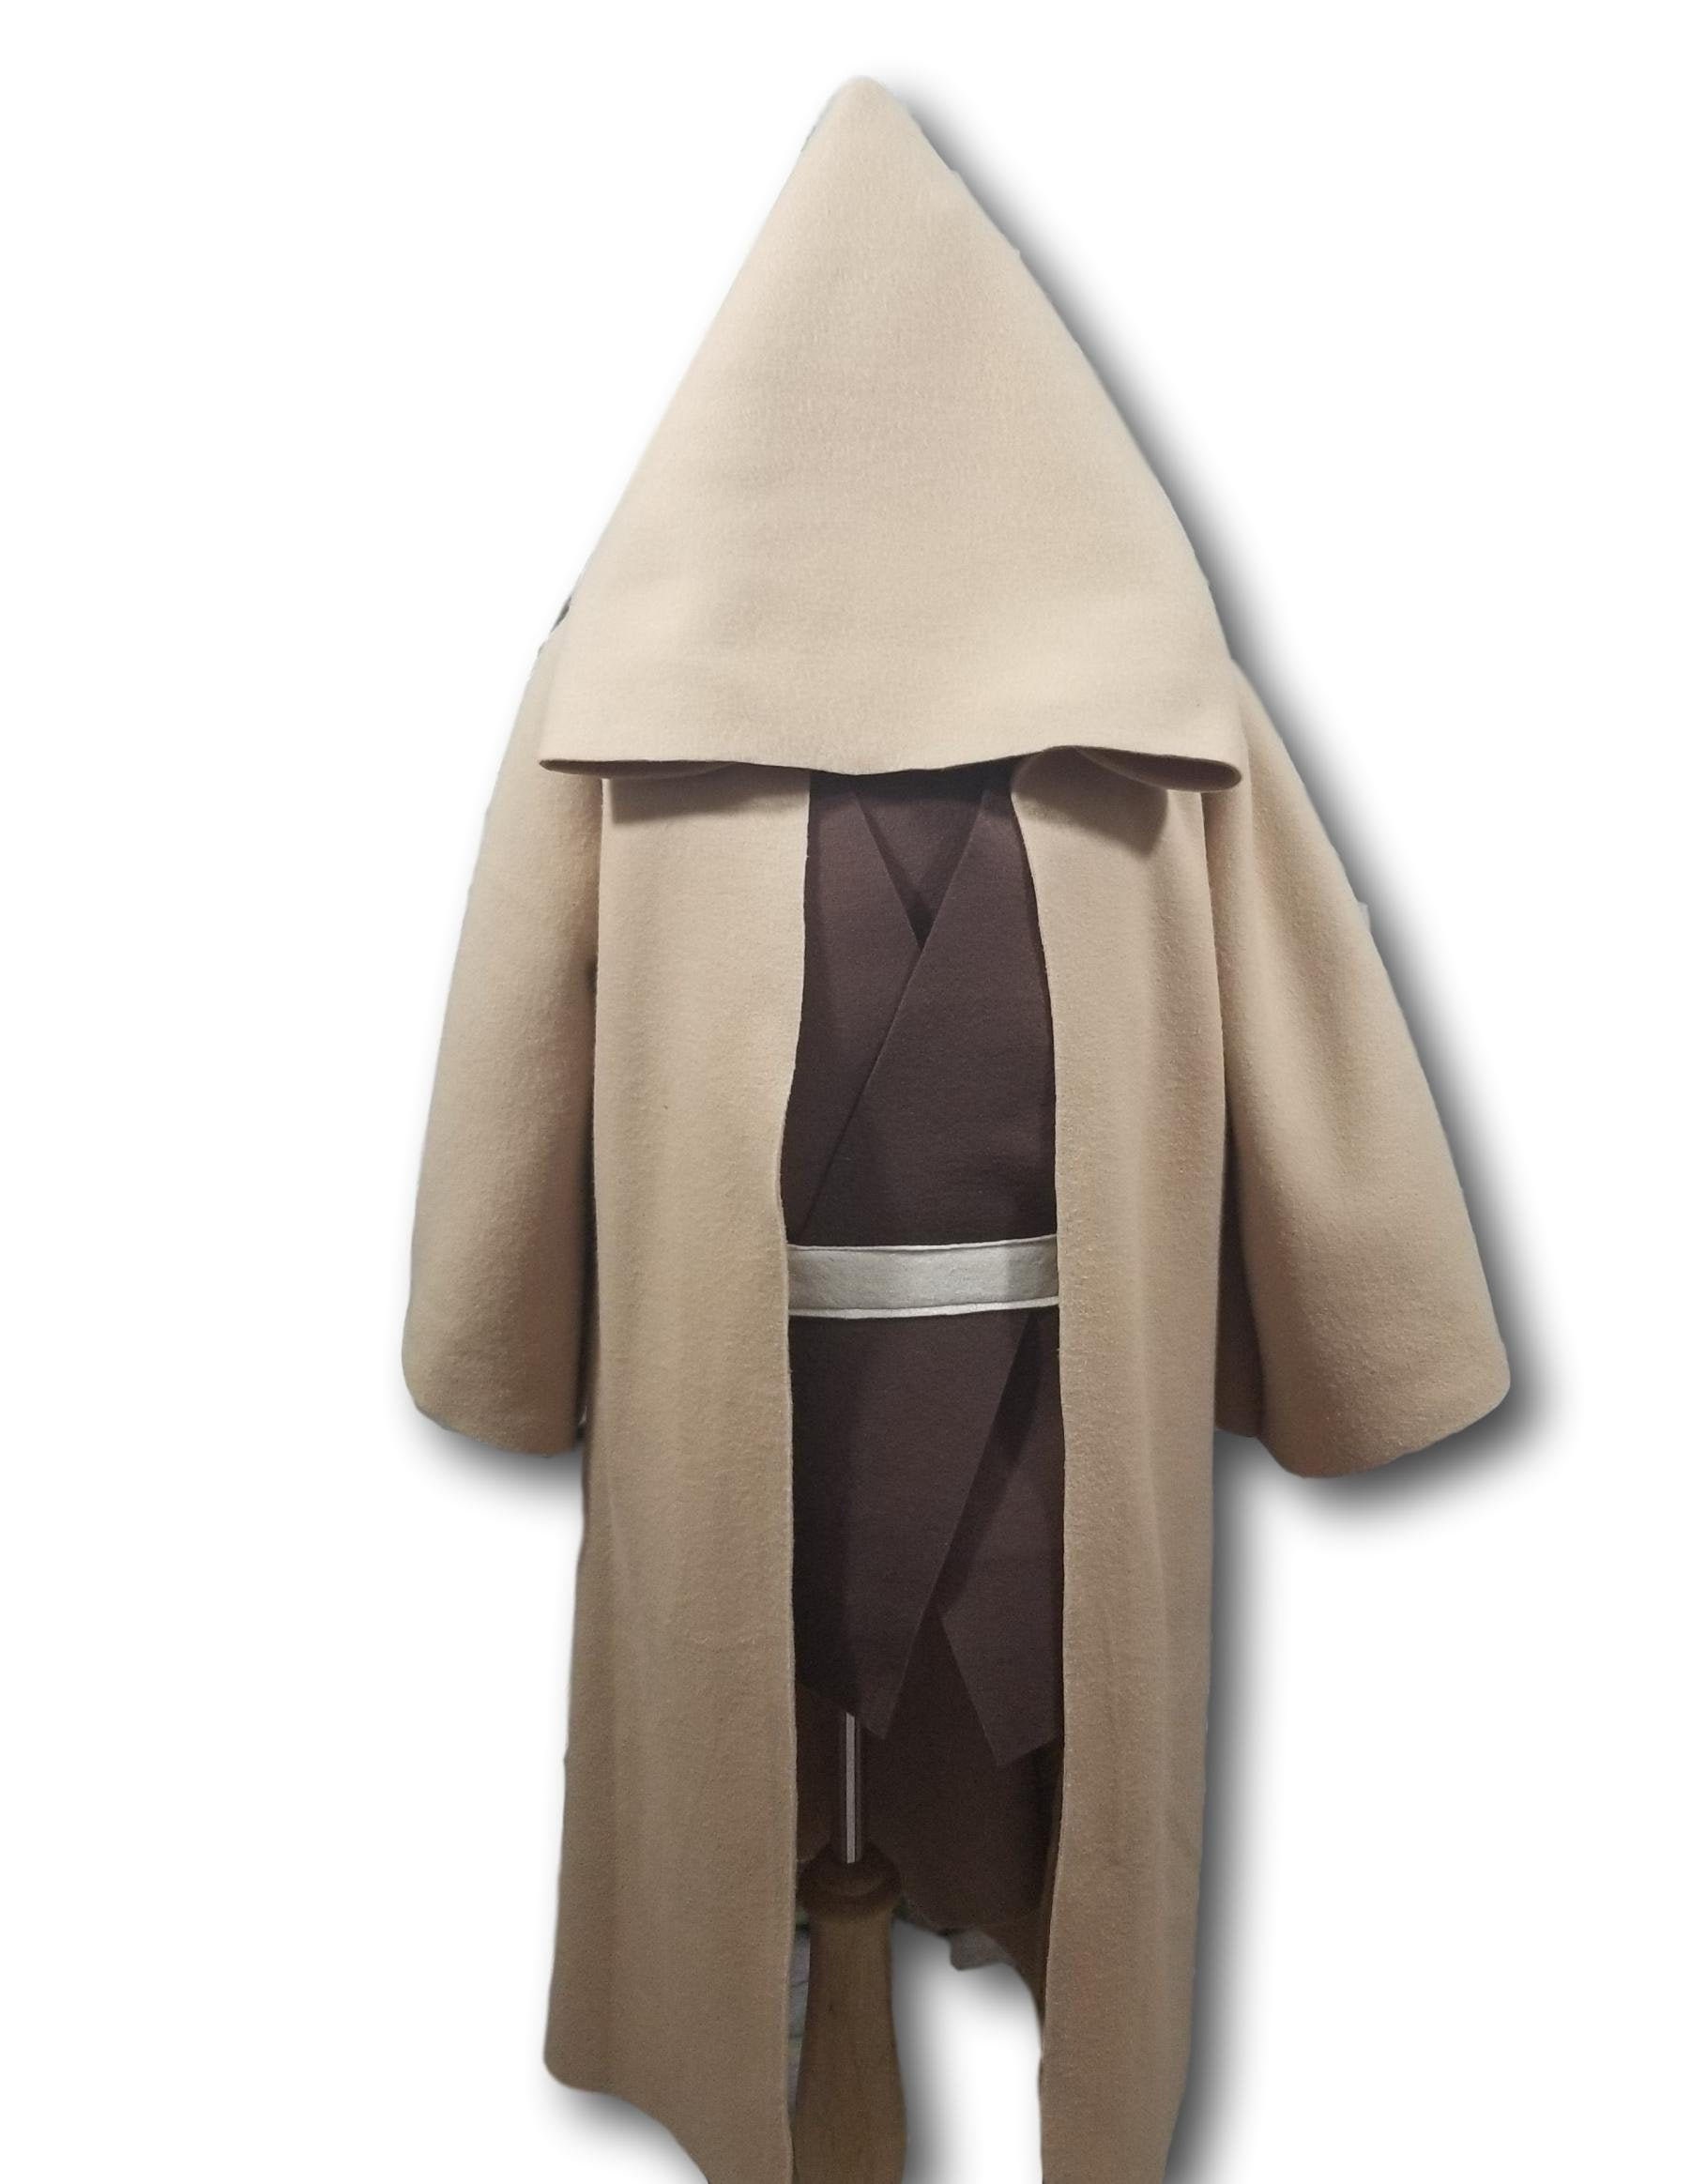 Kids Teen Adult Sizes Perfect under your Jedi Robe Toddler Star Wars Luke Costume Tunic Baby